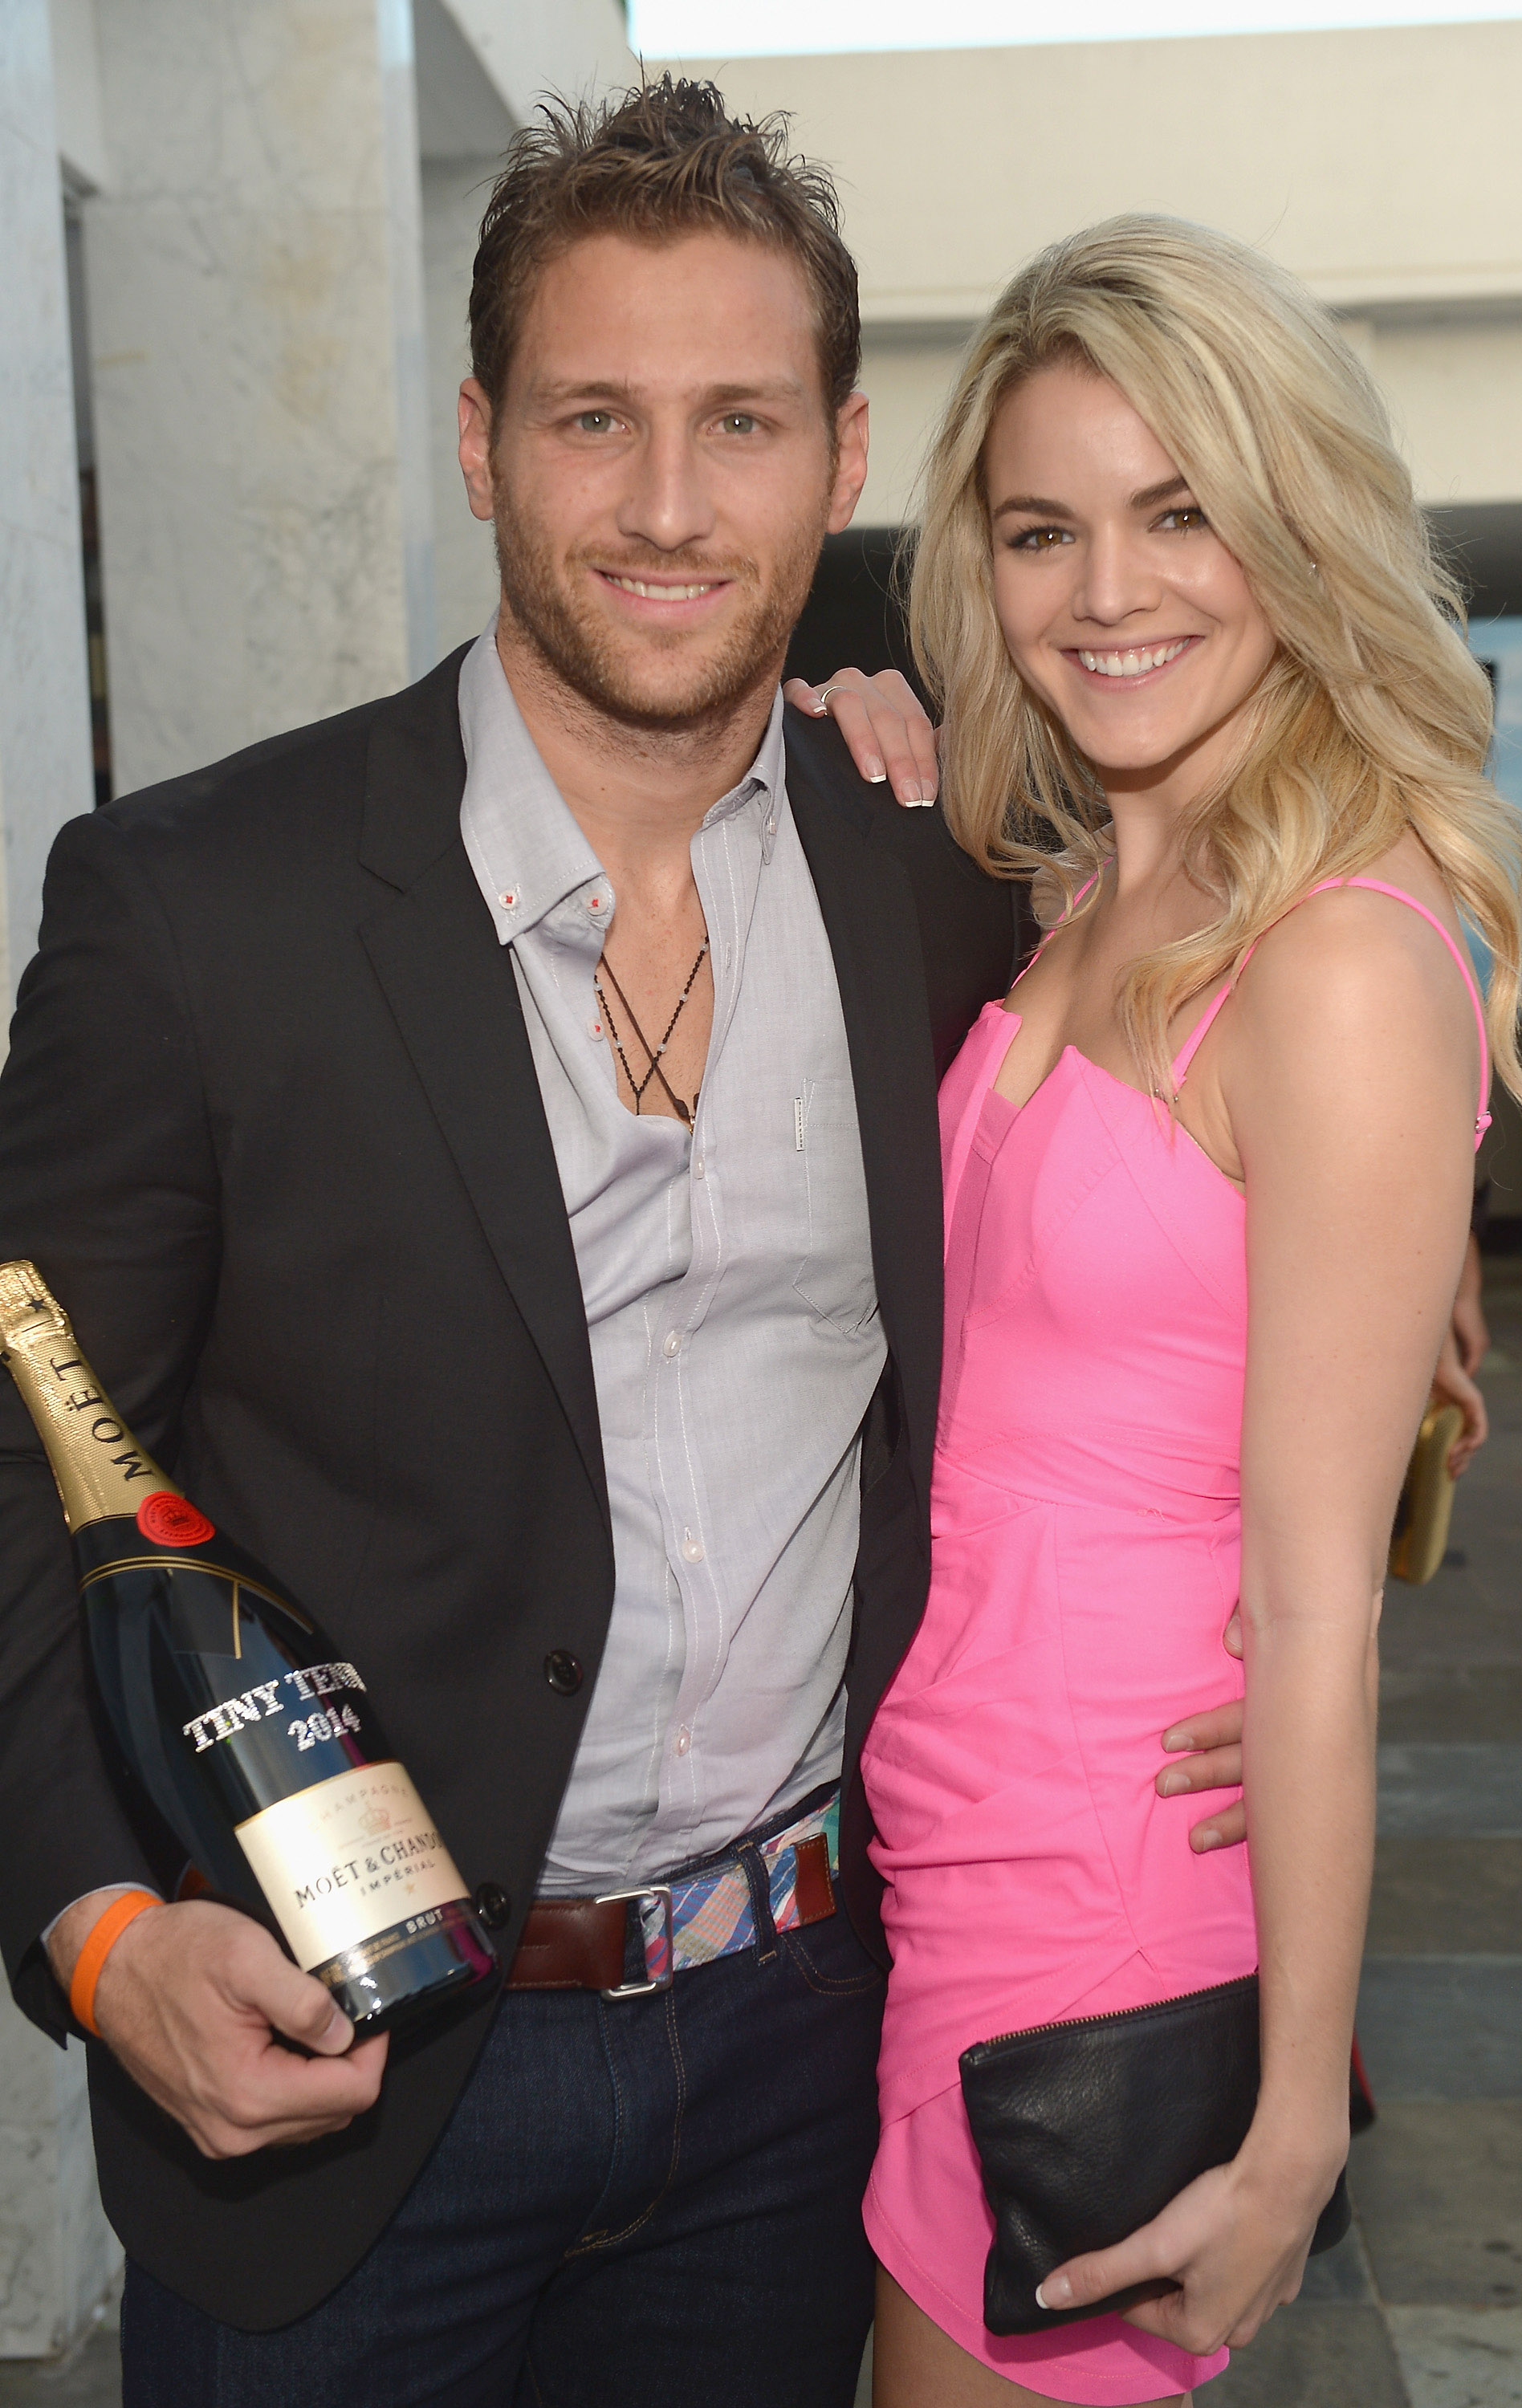 Juan Pablo Galavis and Nikki Ferrell attends the Moet & Chandon "Tiny Tennis" With Roger Federer at Club 50 at Viceroy Miami on March 19, 2014 in Miami, Florida.  (Photo by Gustavo Caballero/Getty Images for Moet & Chandon)